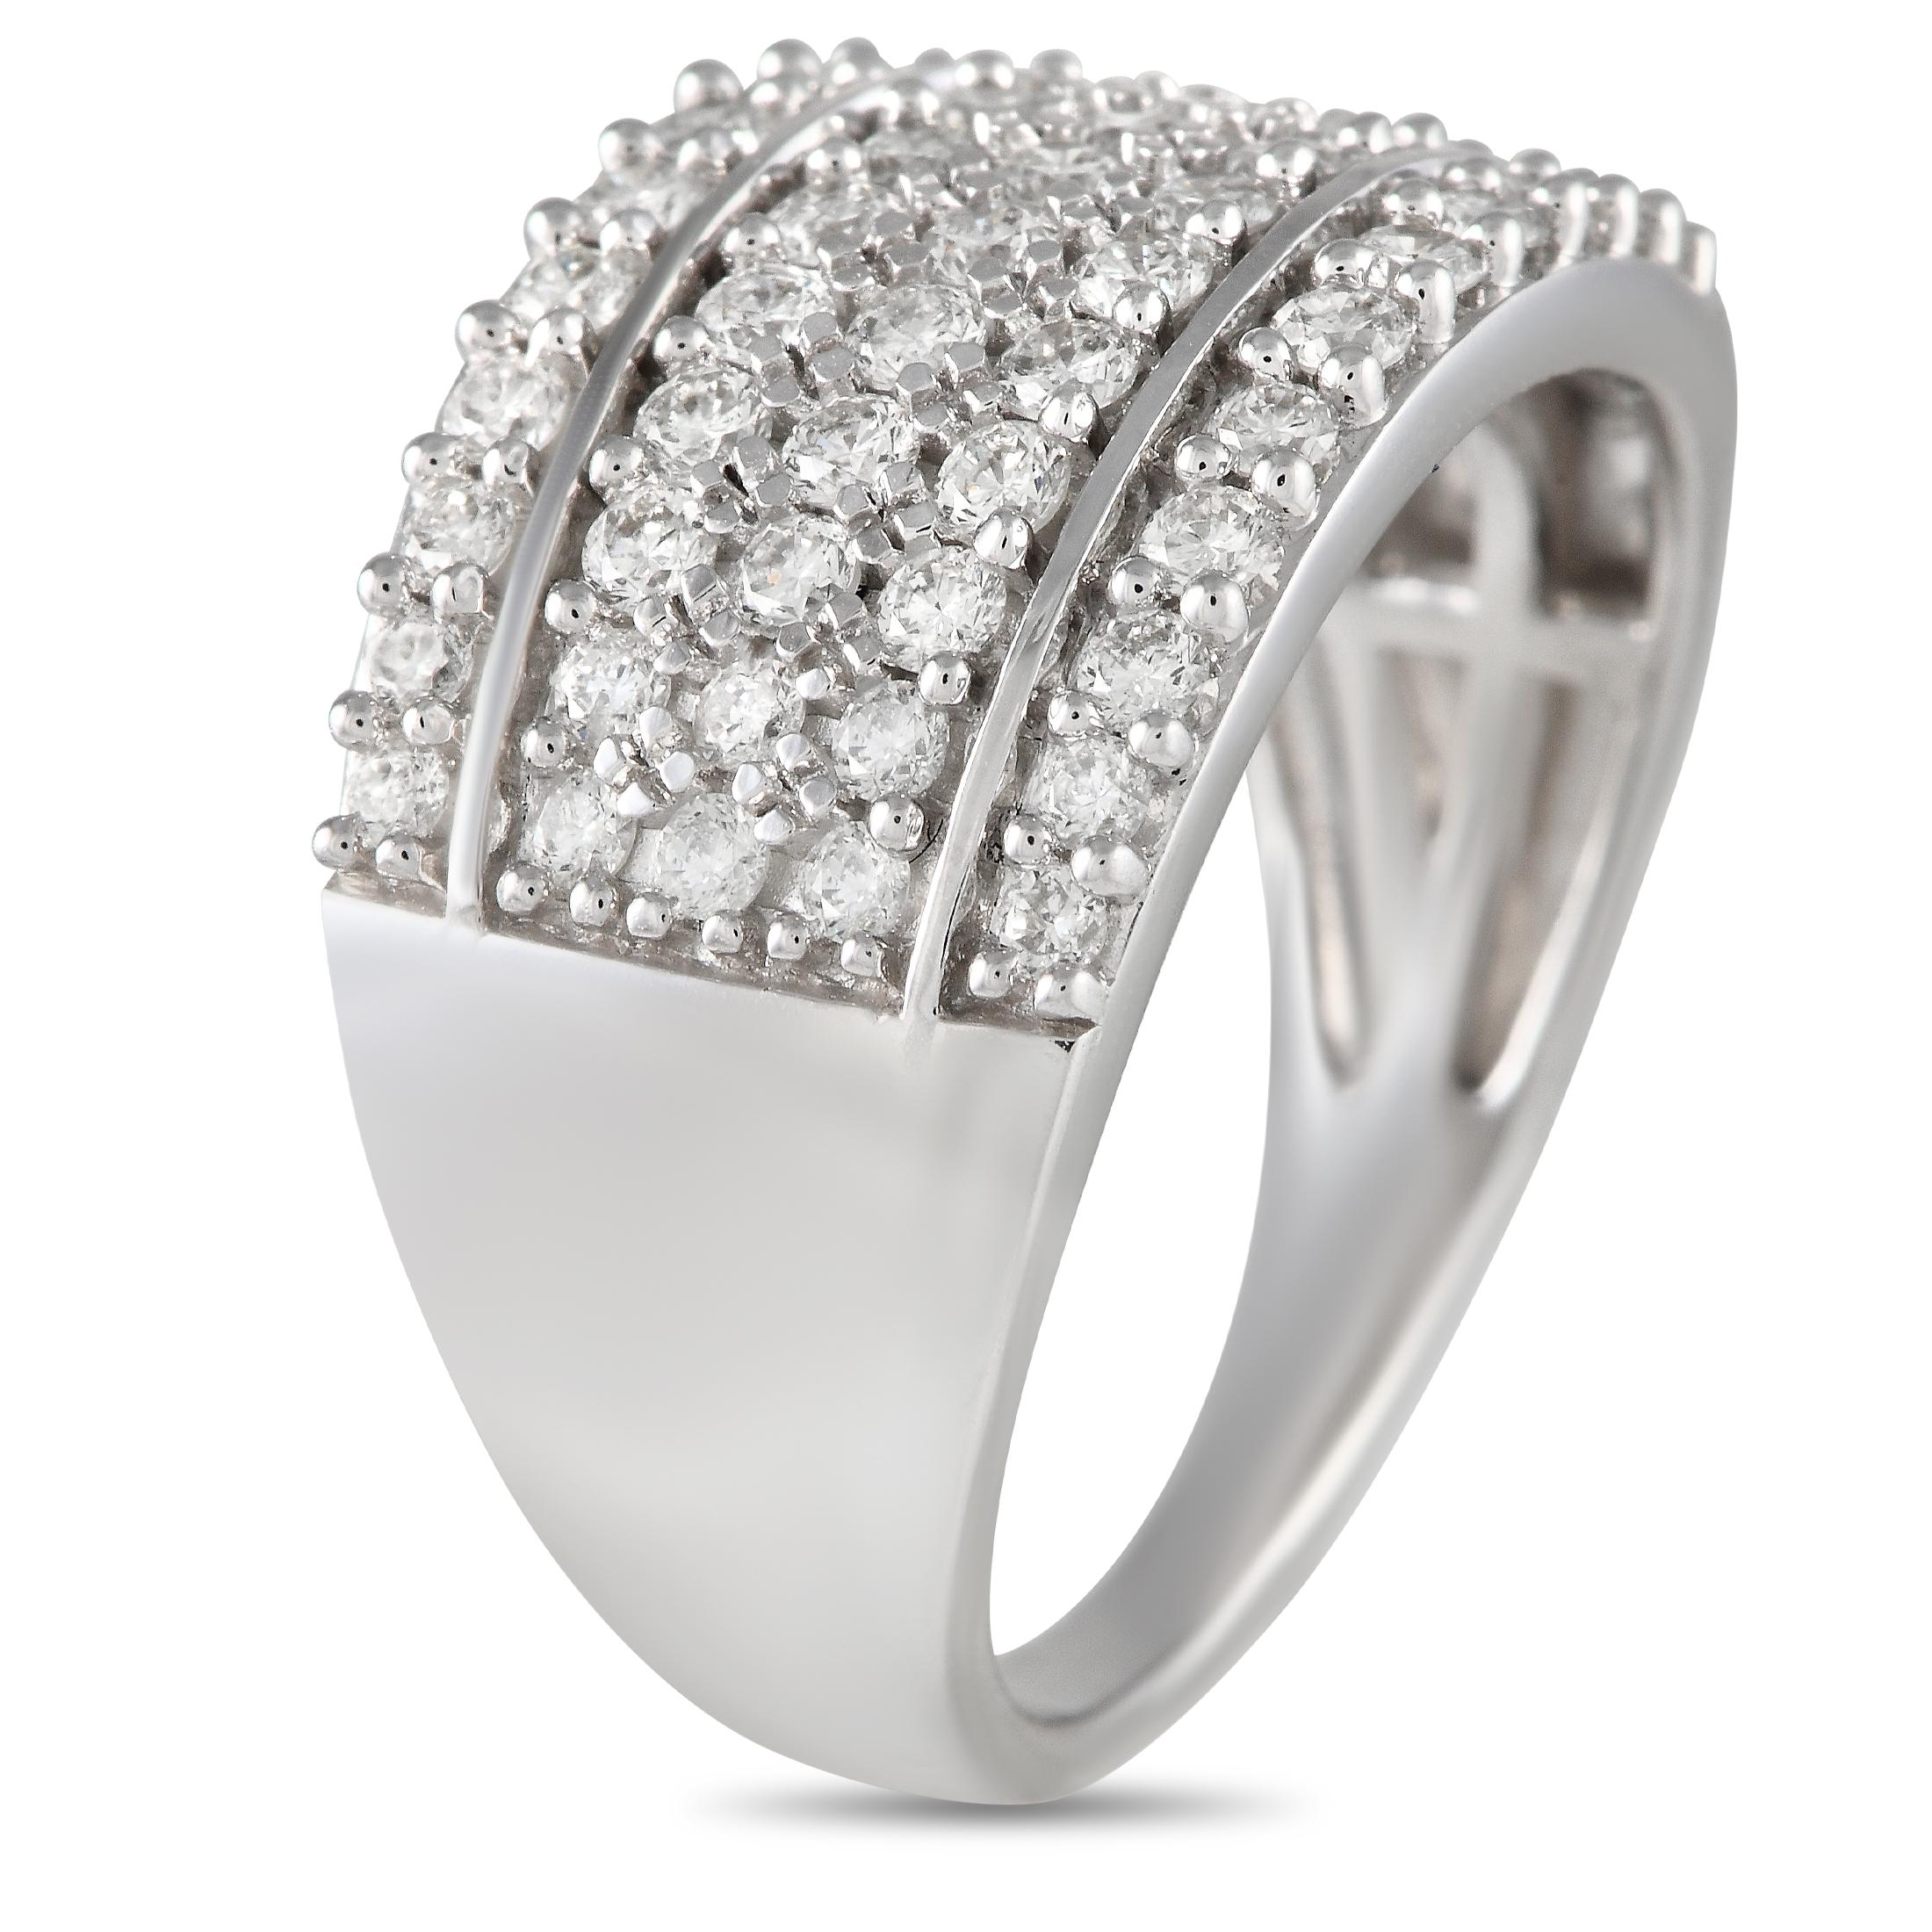 Delivering maximum sparkle and impact, this wide-band diamond ring shimmers with five rows of diamonds totaling 1 carat weight. The band tapers in width towards the back for a comfortable fit. The ring's top dimensions measure 16mm by 12mm.A gift